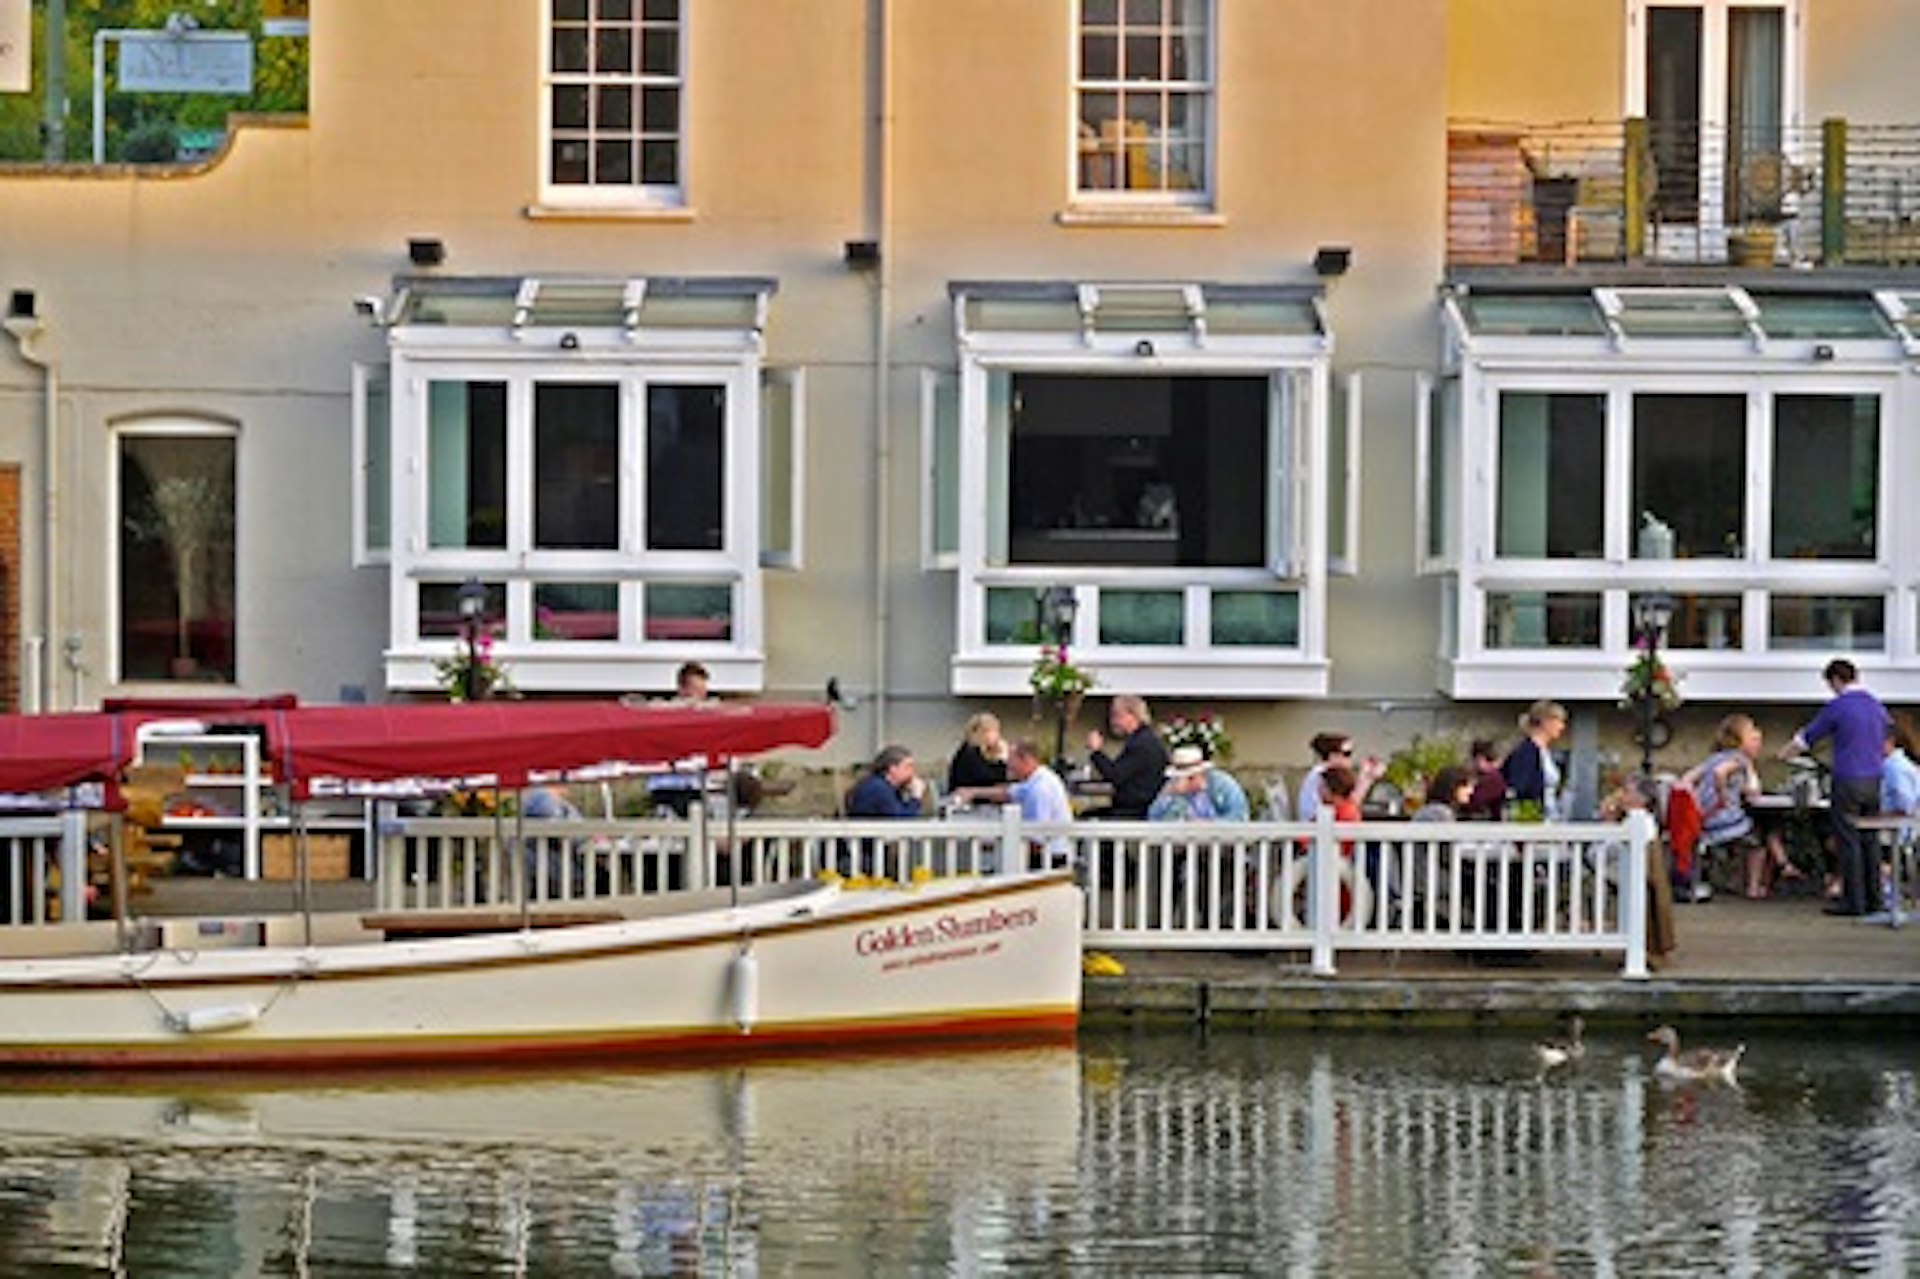 Riverside Afternoon Tea for Two with Bubbly in Oxford 2